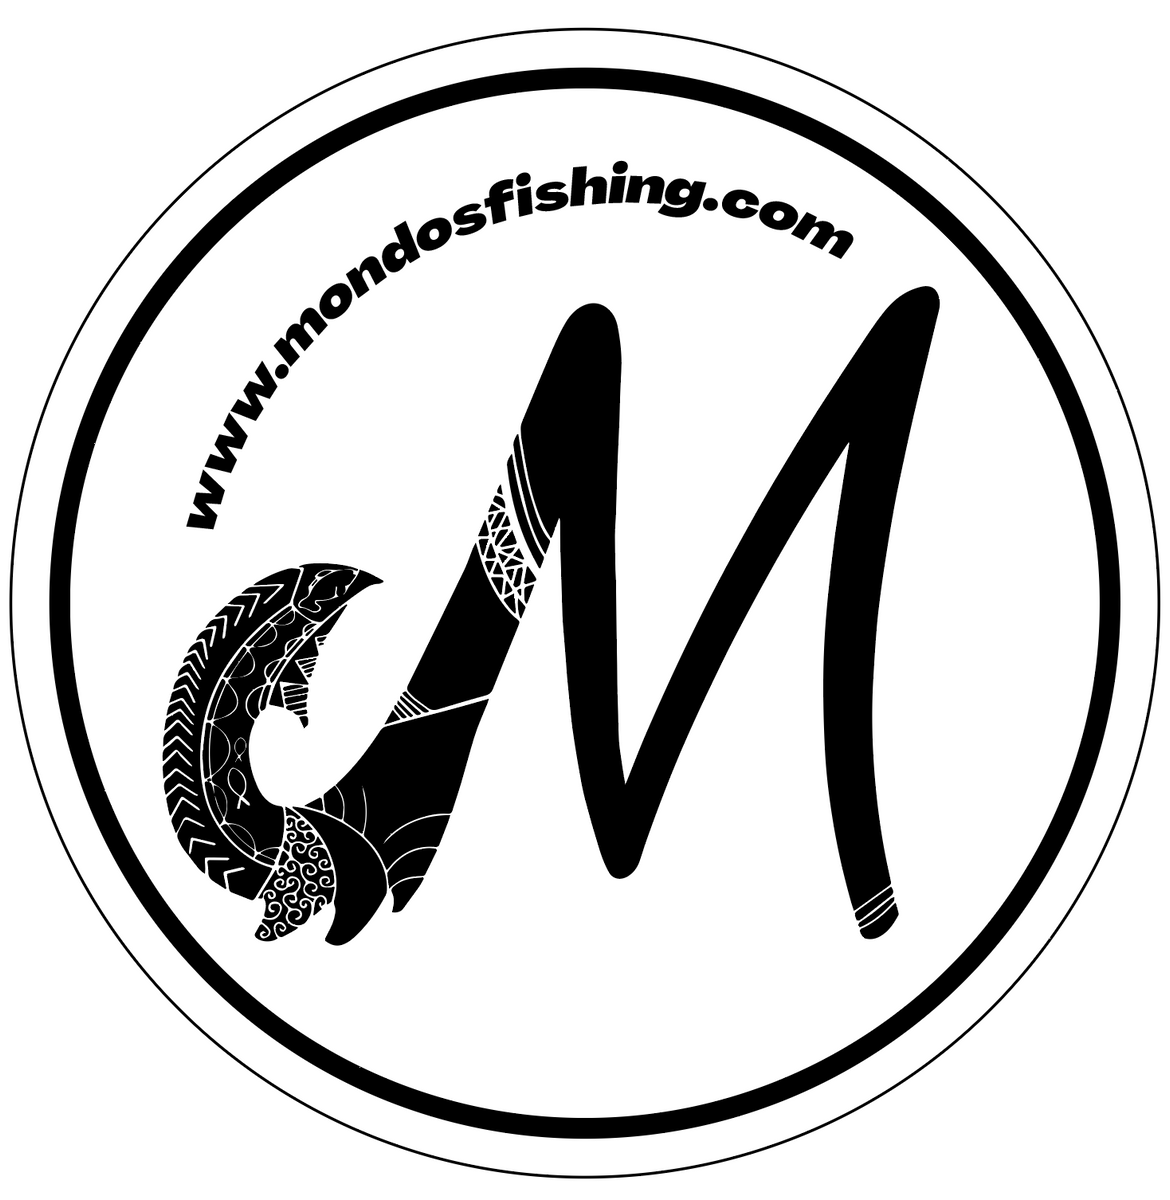  5 Gary Yamamto Decal Sticker Fishing Line, Lures, Rods, Baits  : Sports & Outdoors